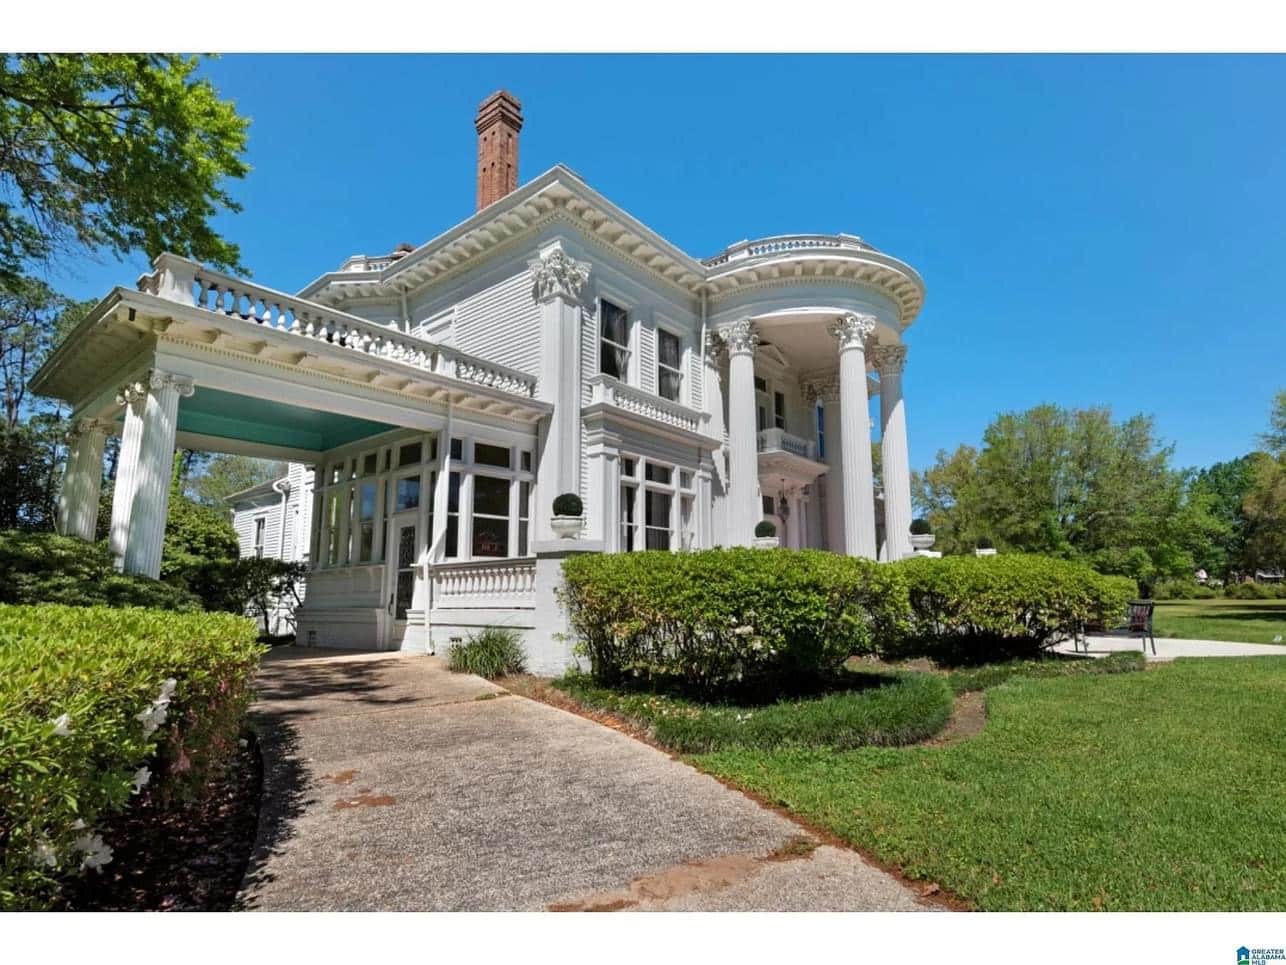 1903 Neoclassical For Sale In Brewton Alabama